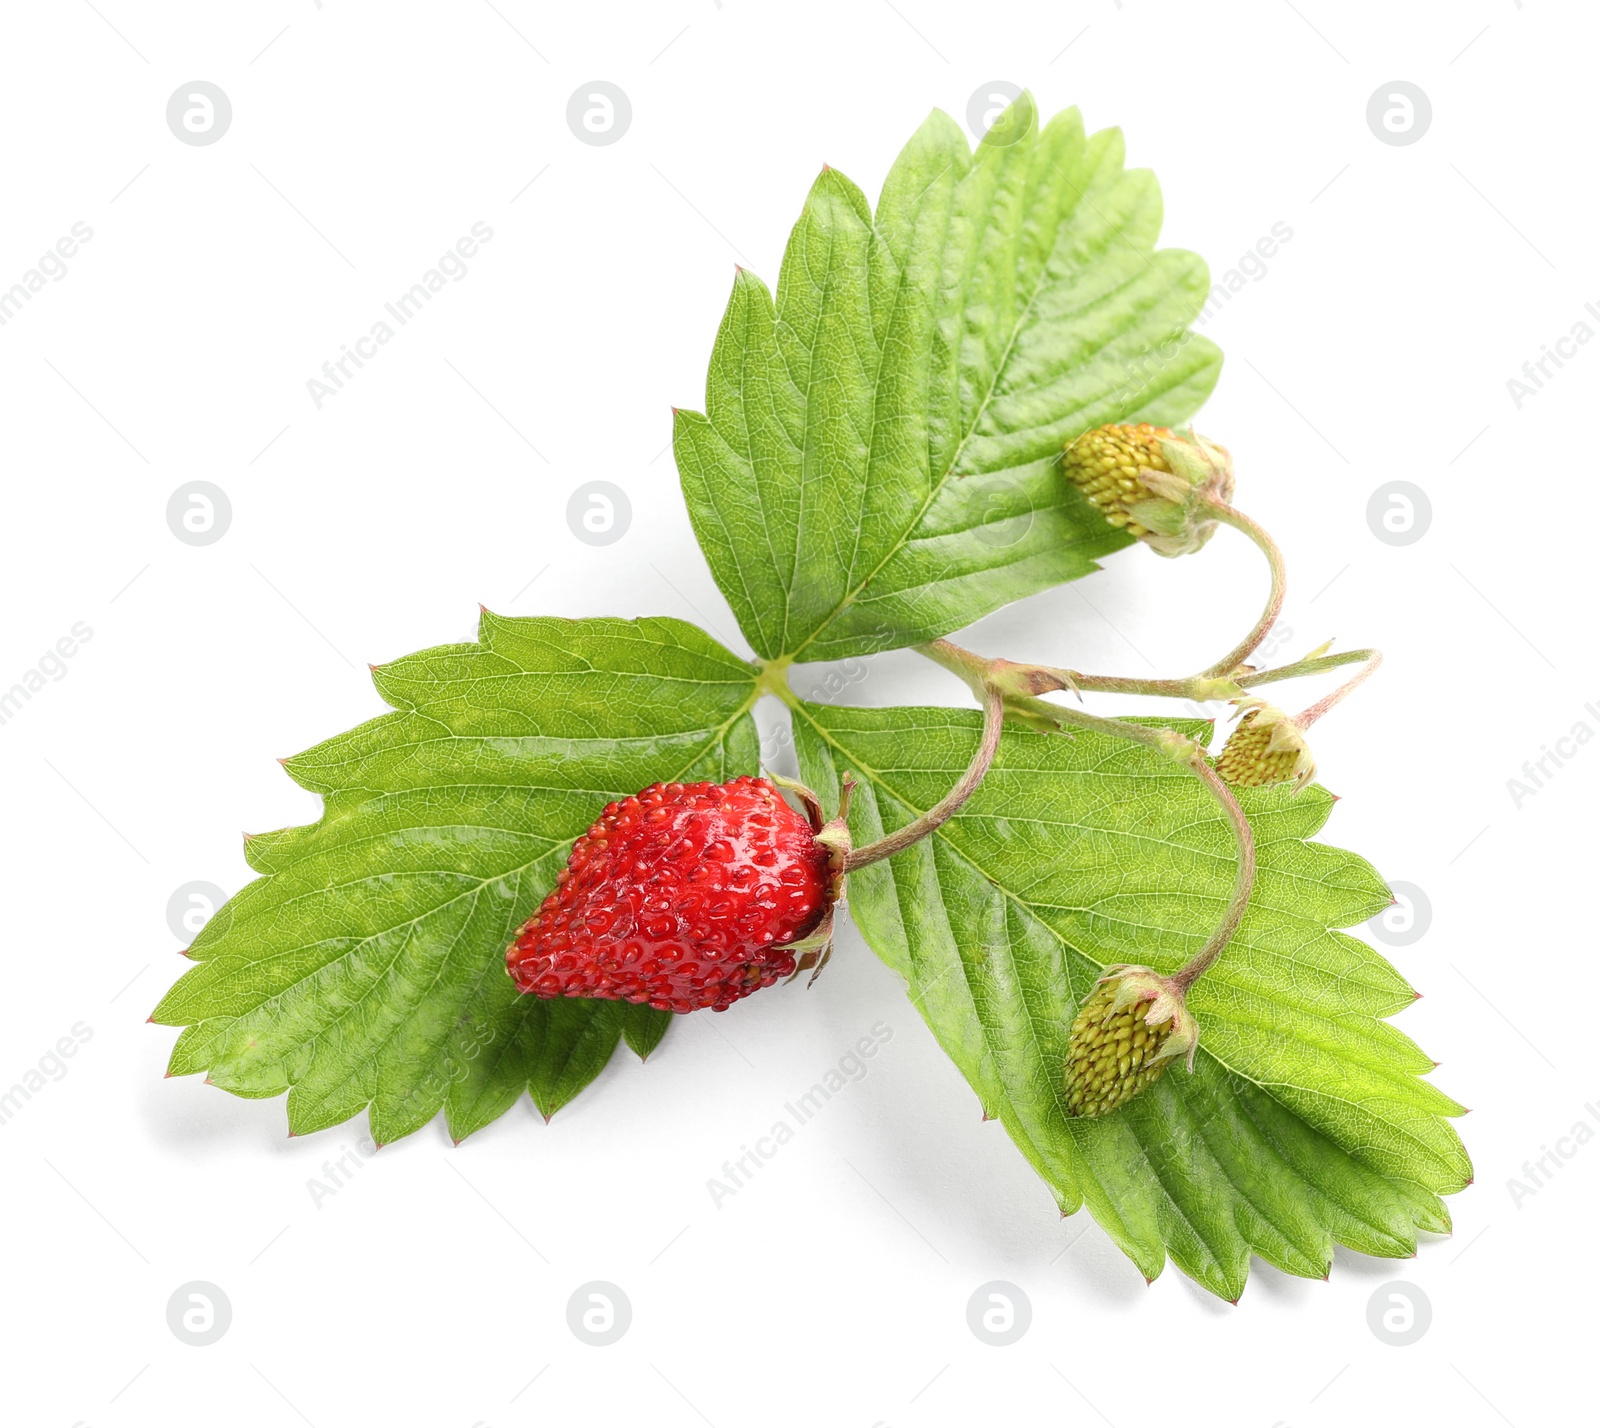 Photo of Wild strawberries and green leaves isolated on white